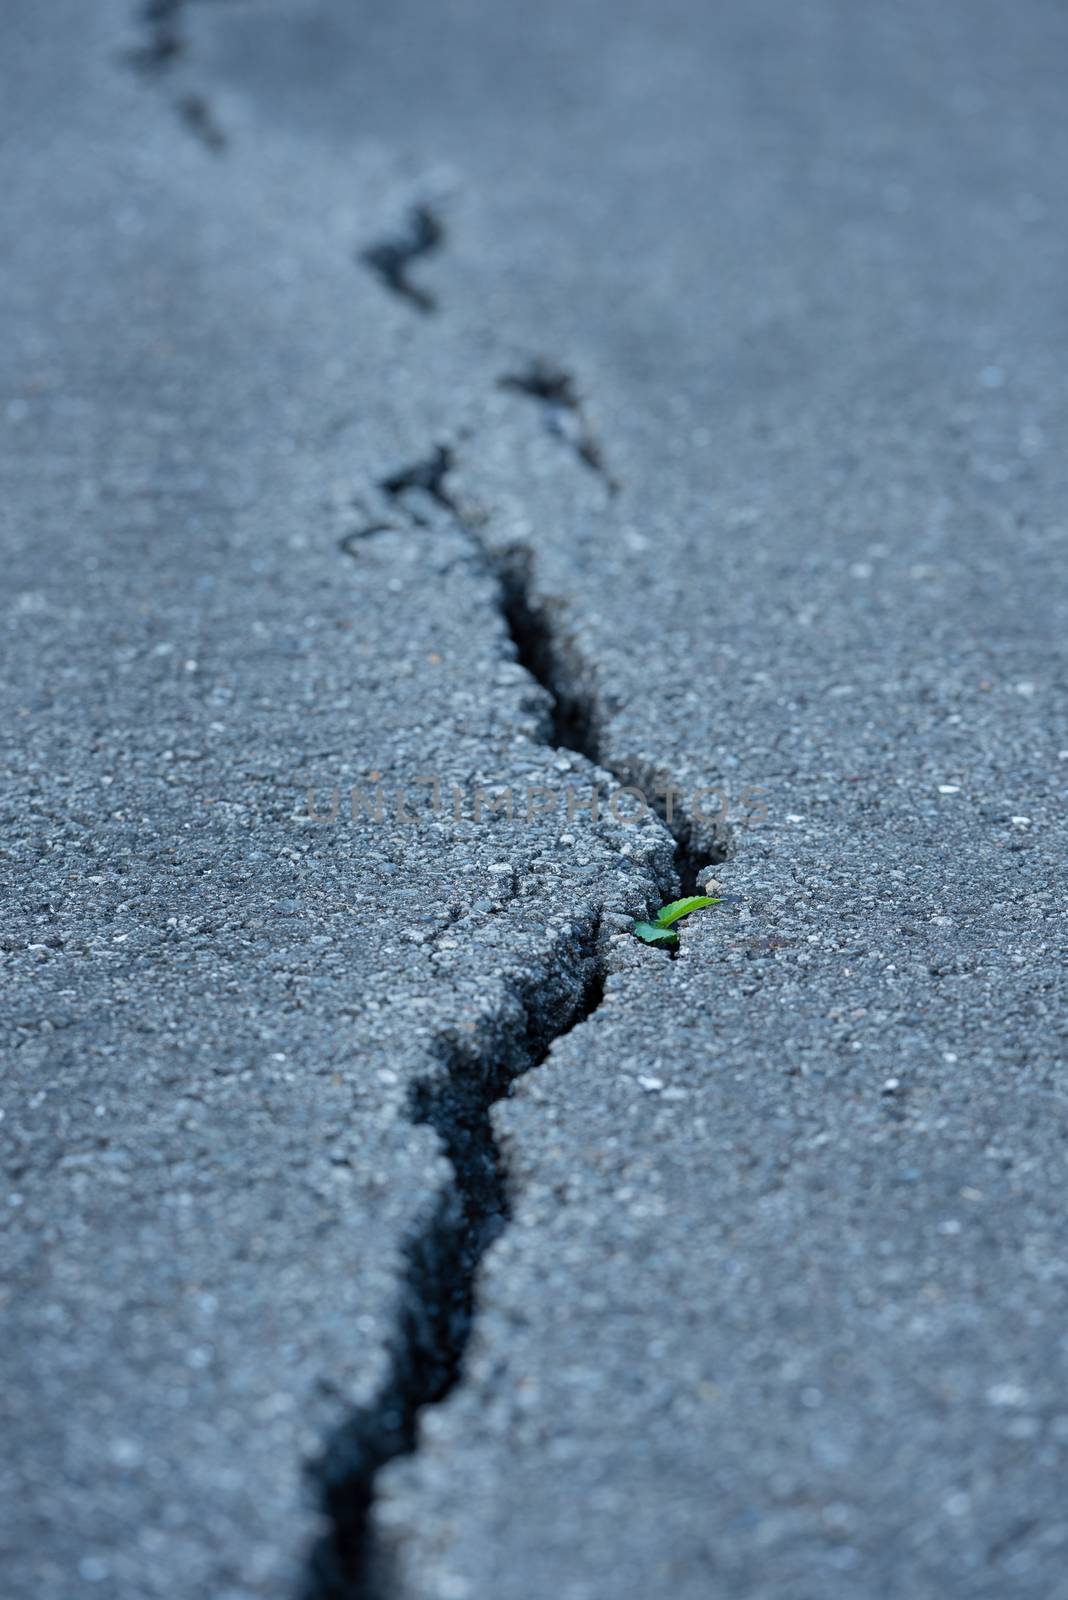 A long windy crack on a paved street with a small plant growing in it.